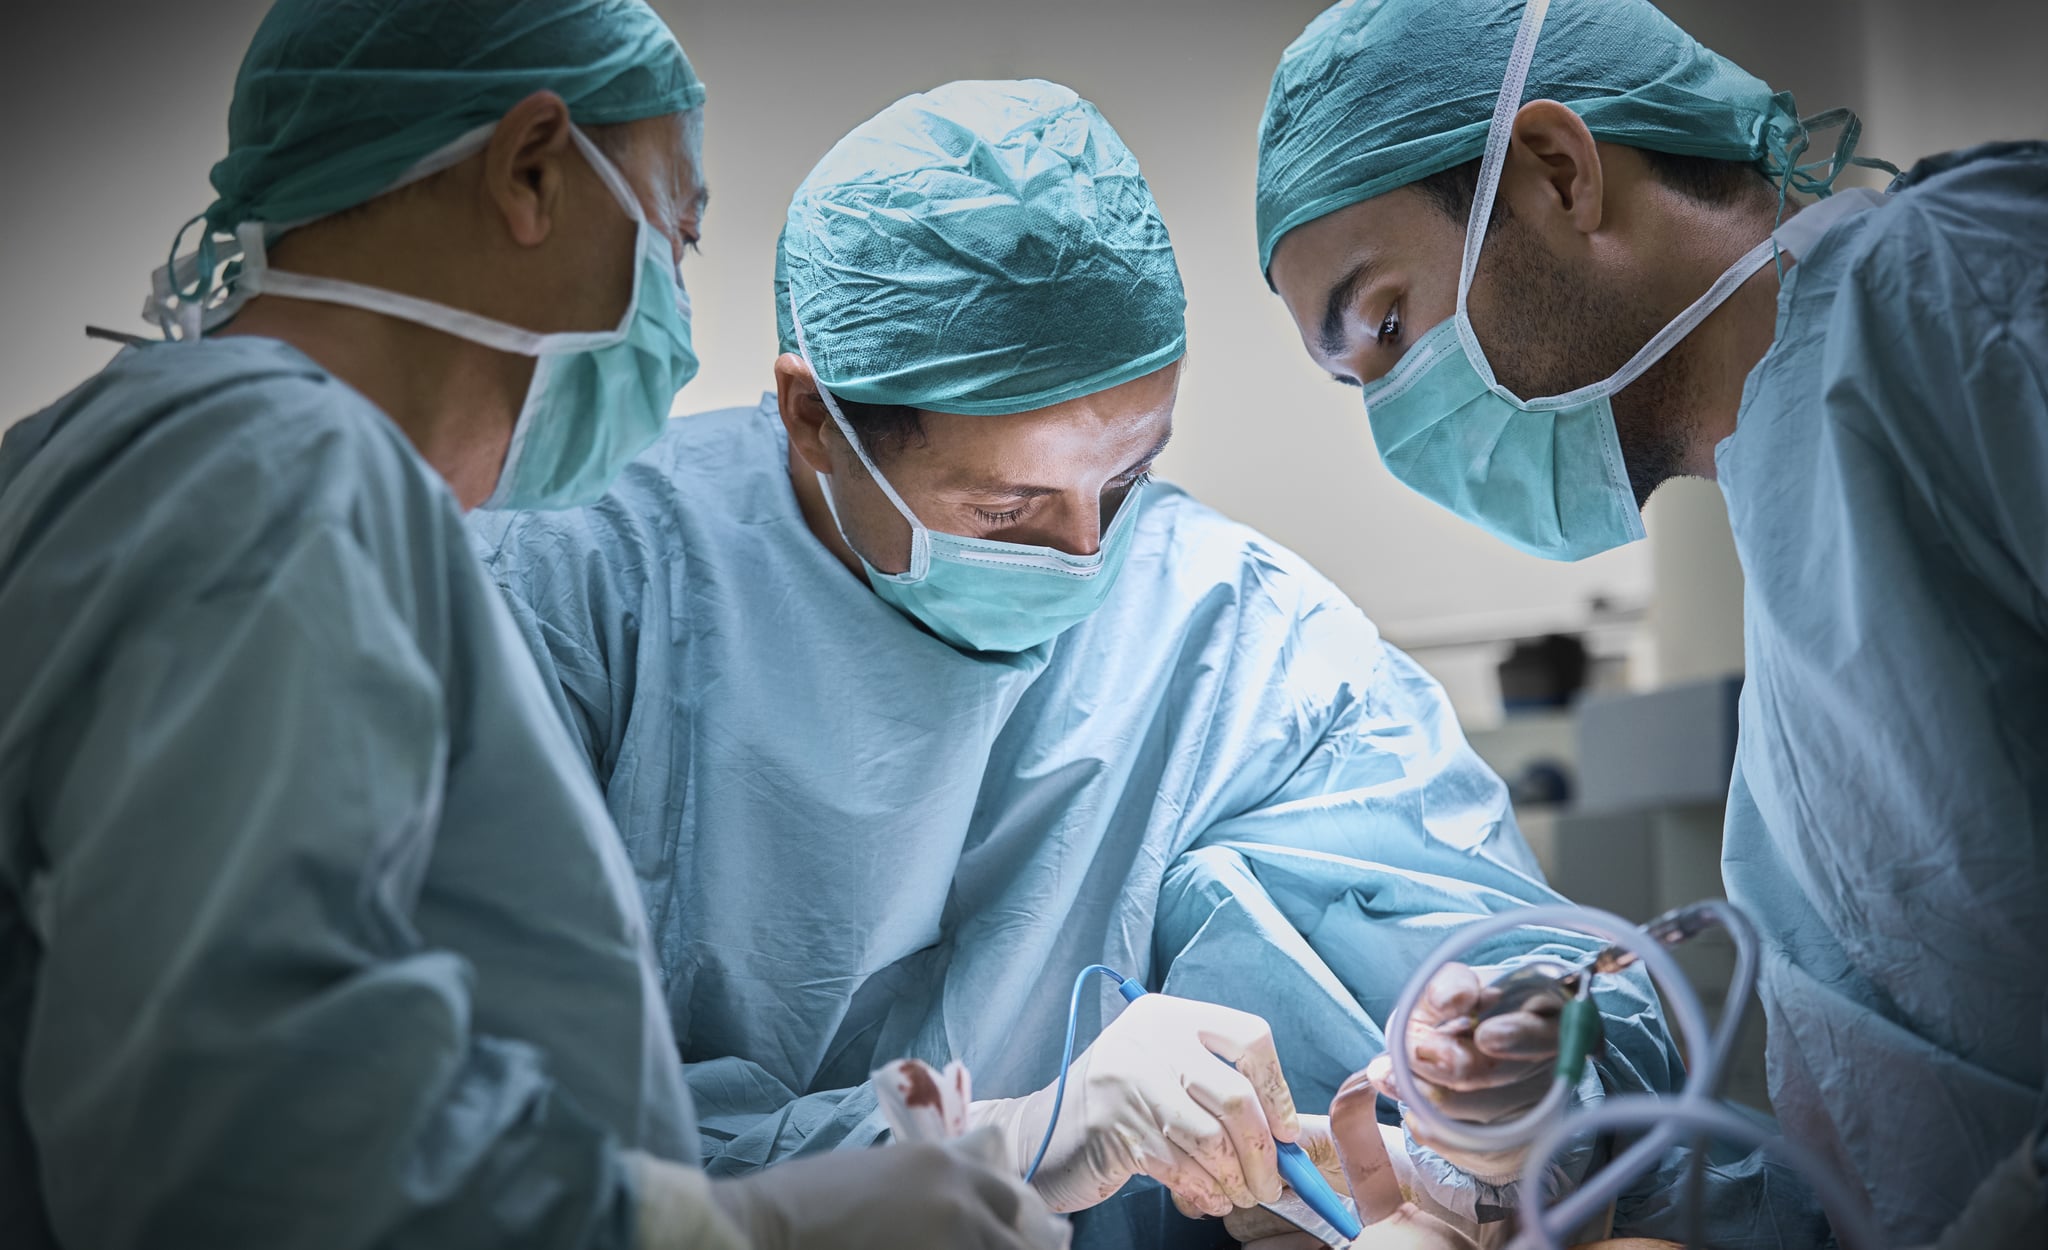 Plastic surgeons operating patient for breast implant. Team of doctors are in scrubs at operating room. They are at hospital.